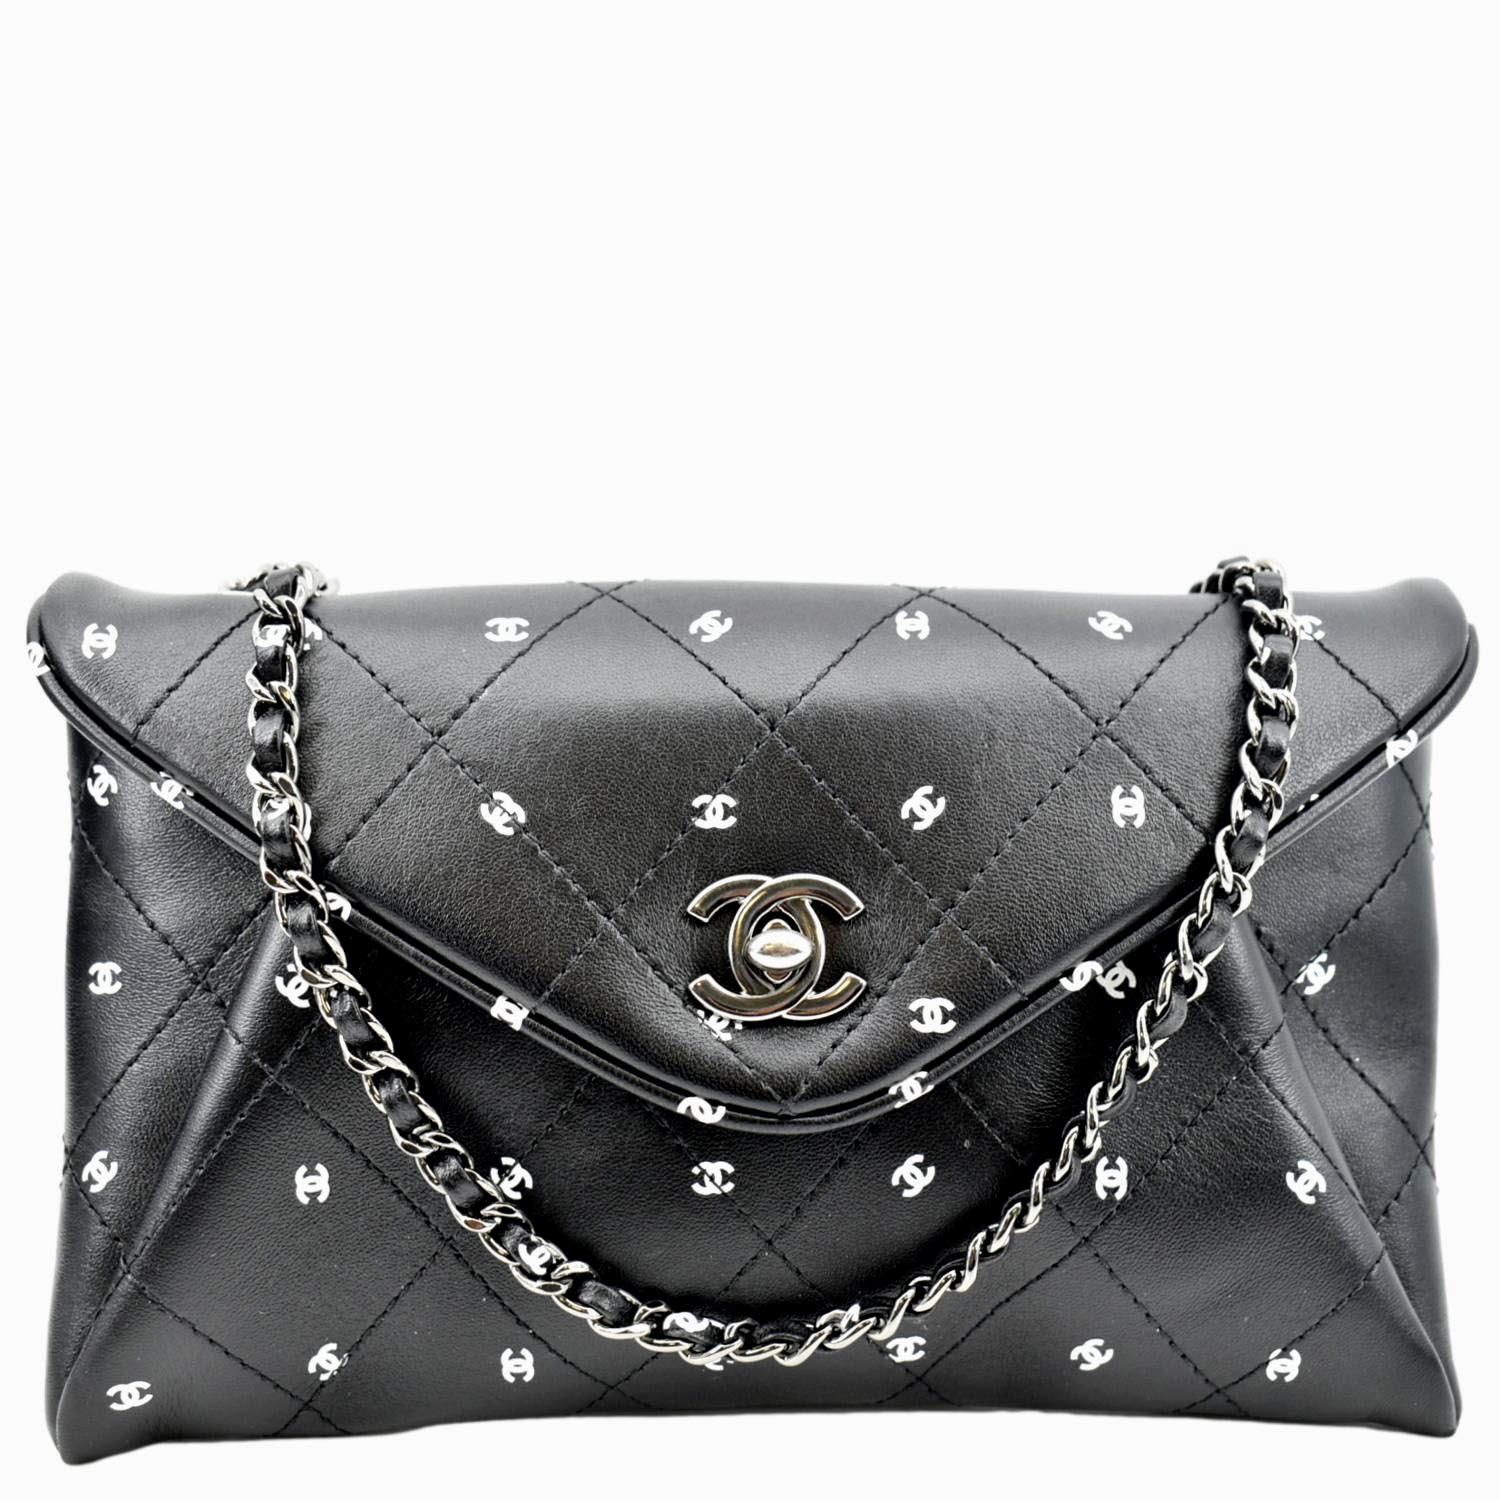 Chanel CC Envelope Printed Lambskin Leather Chain Clutch Bag